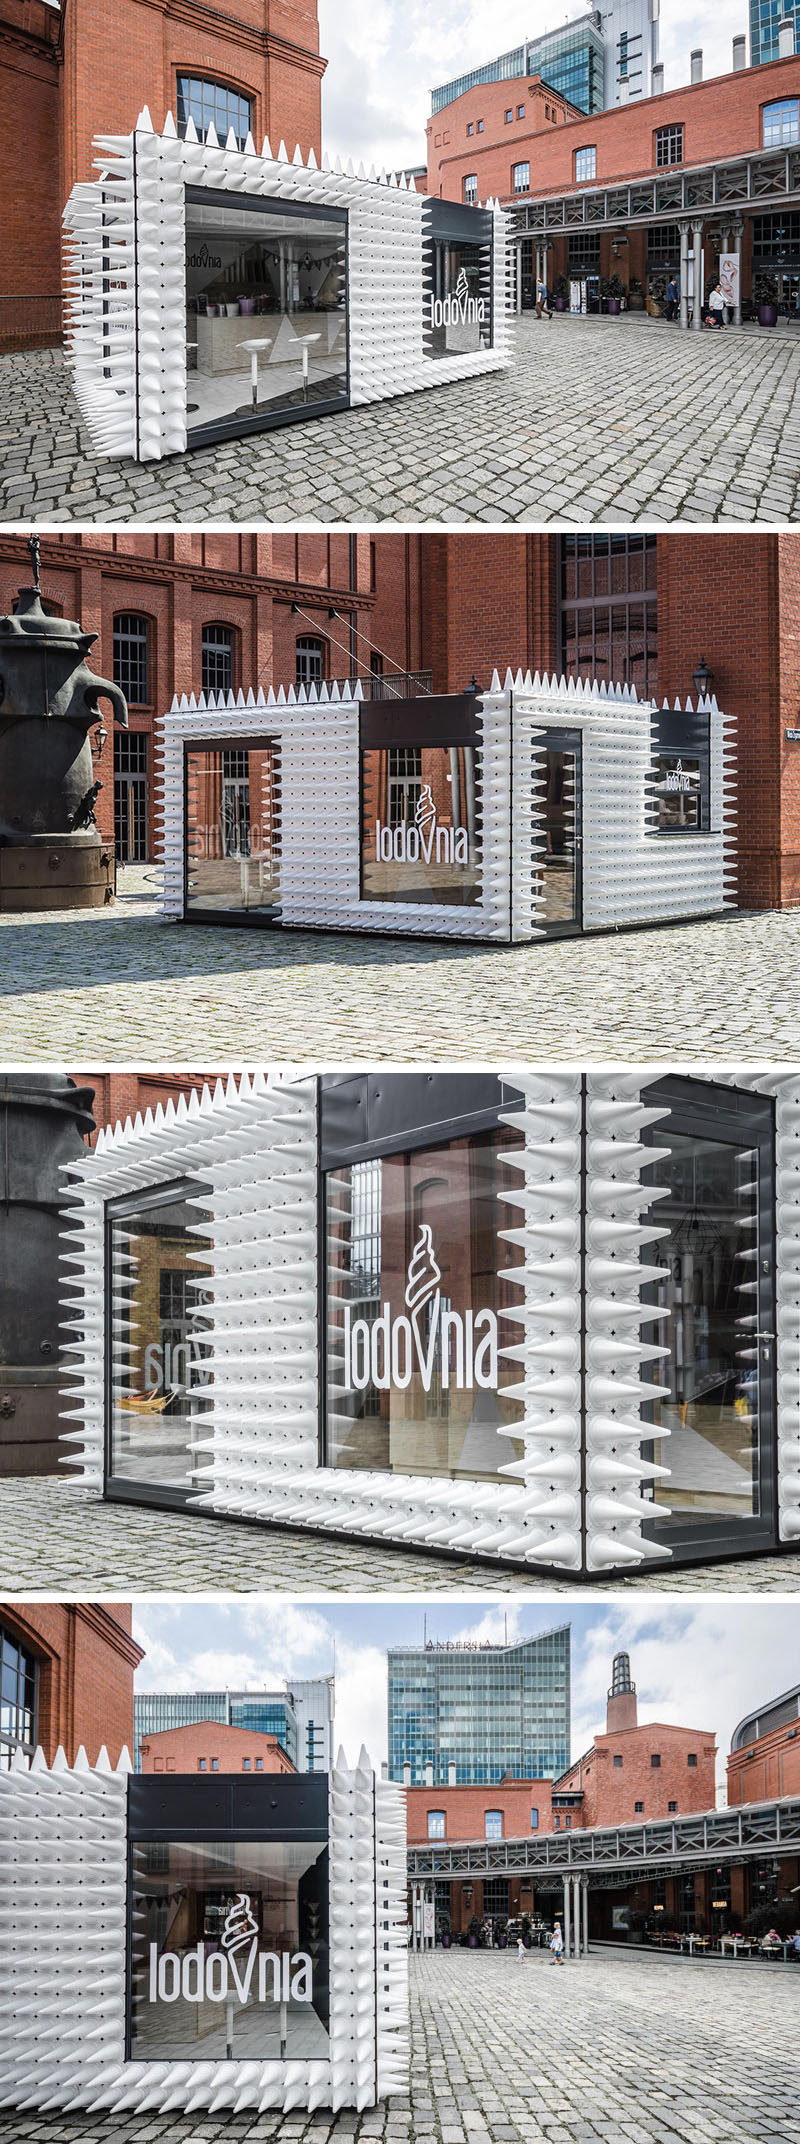 mode:lina architekci have designed LODOVNIA, a mobile ice cream shop in Poland that's covered in almost 1,000 white sports cones, representing the shape of an ice cream cone.